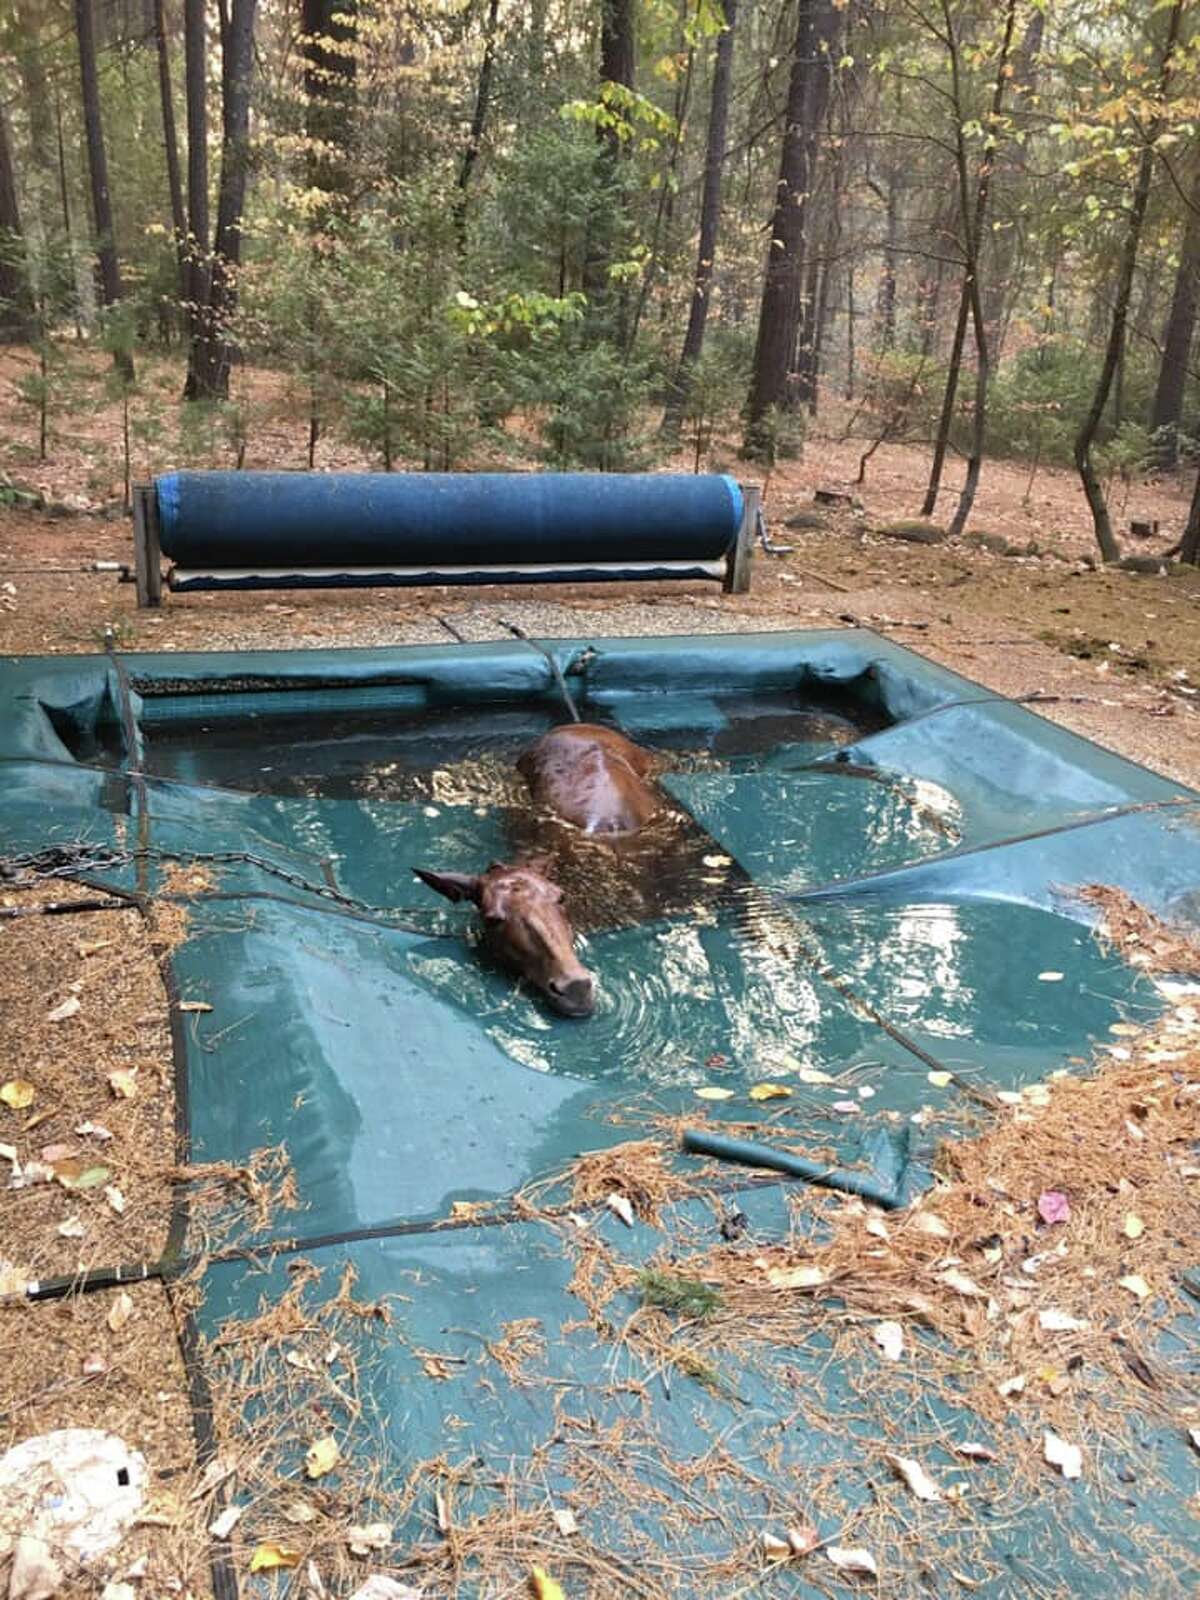 Jeff Hill and Geoff Sheldon rescue a horse they found in a backyard pool in Paradise. The horse was stranded in the water for an unknown amount of time when Hill and Sheldon found it Sunday.